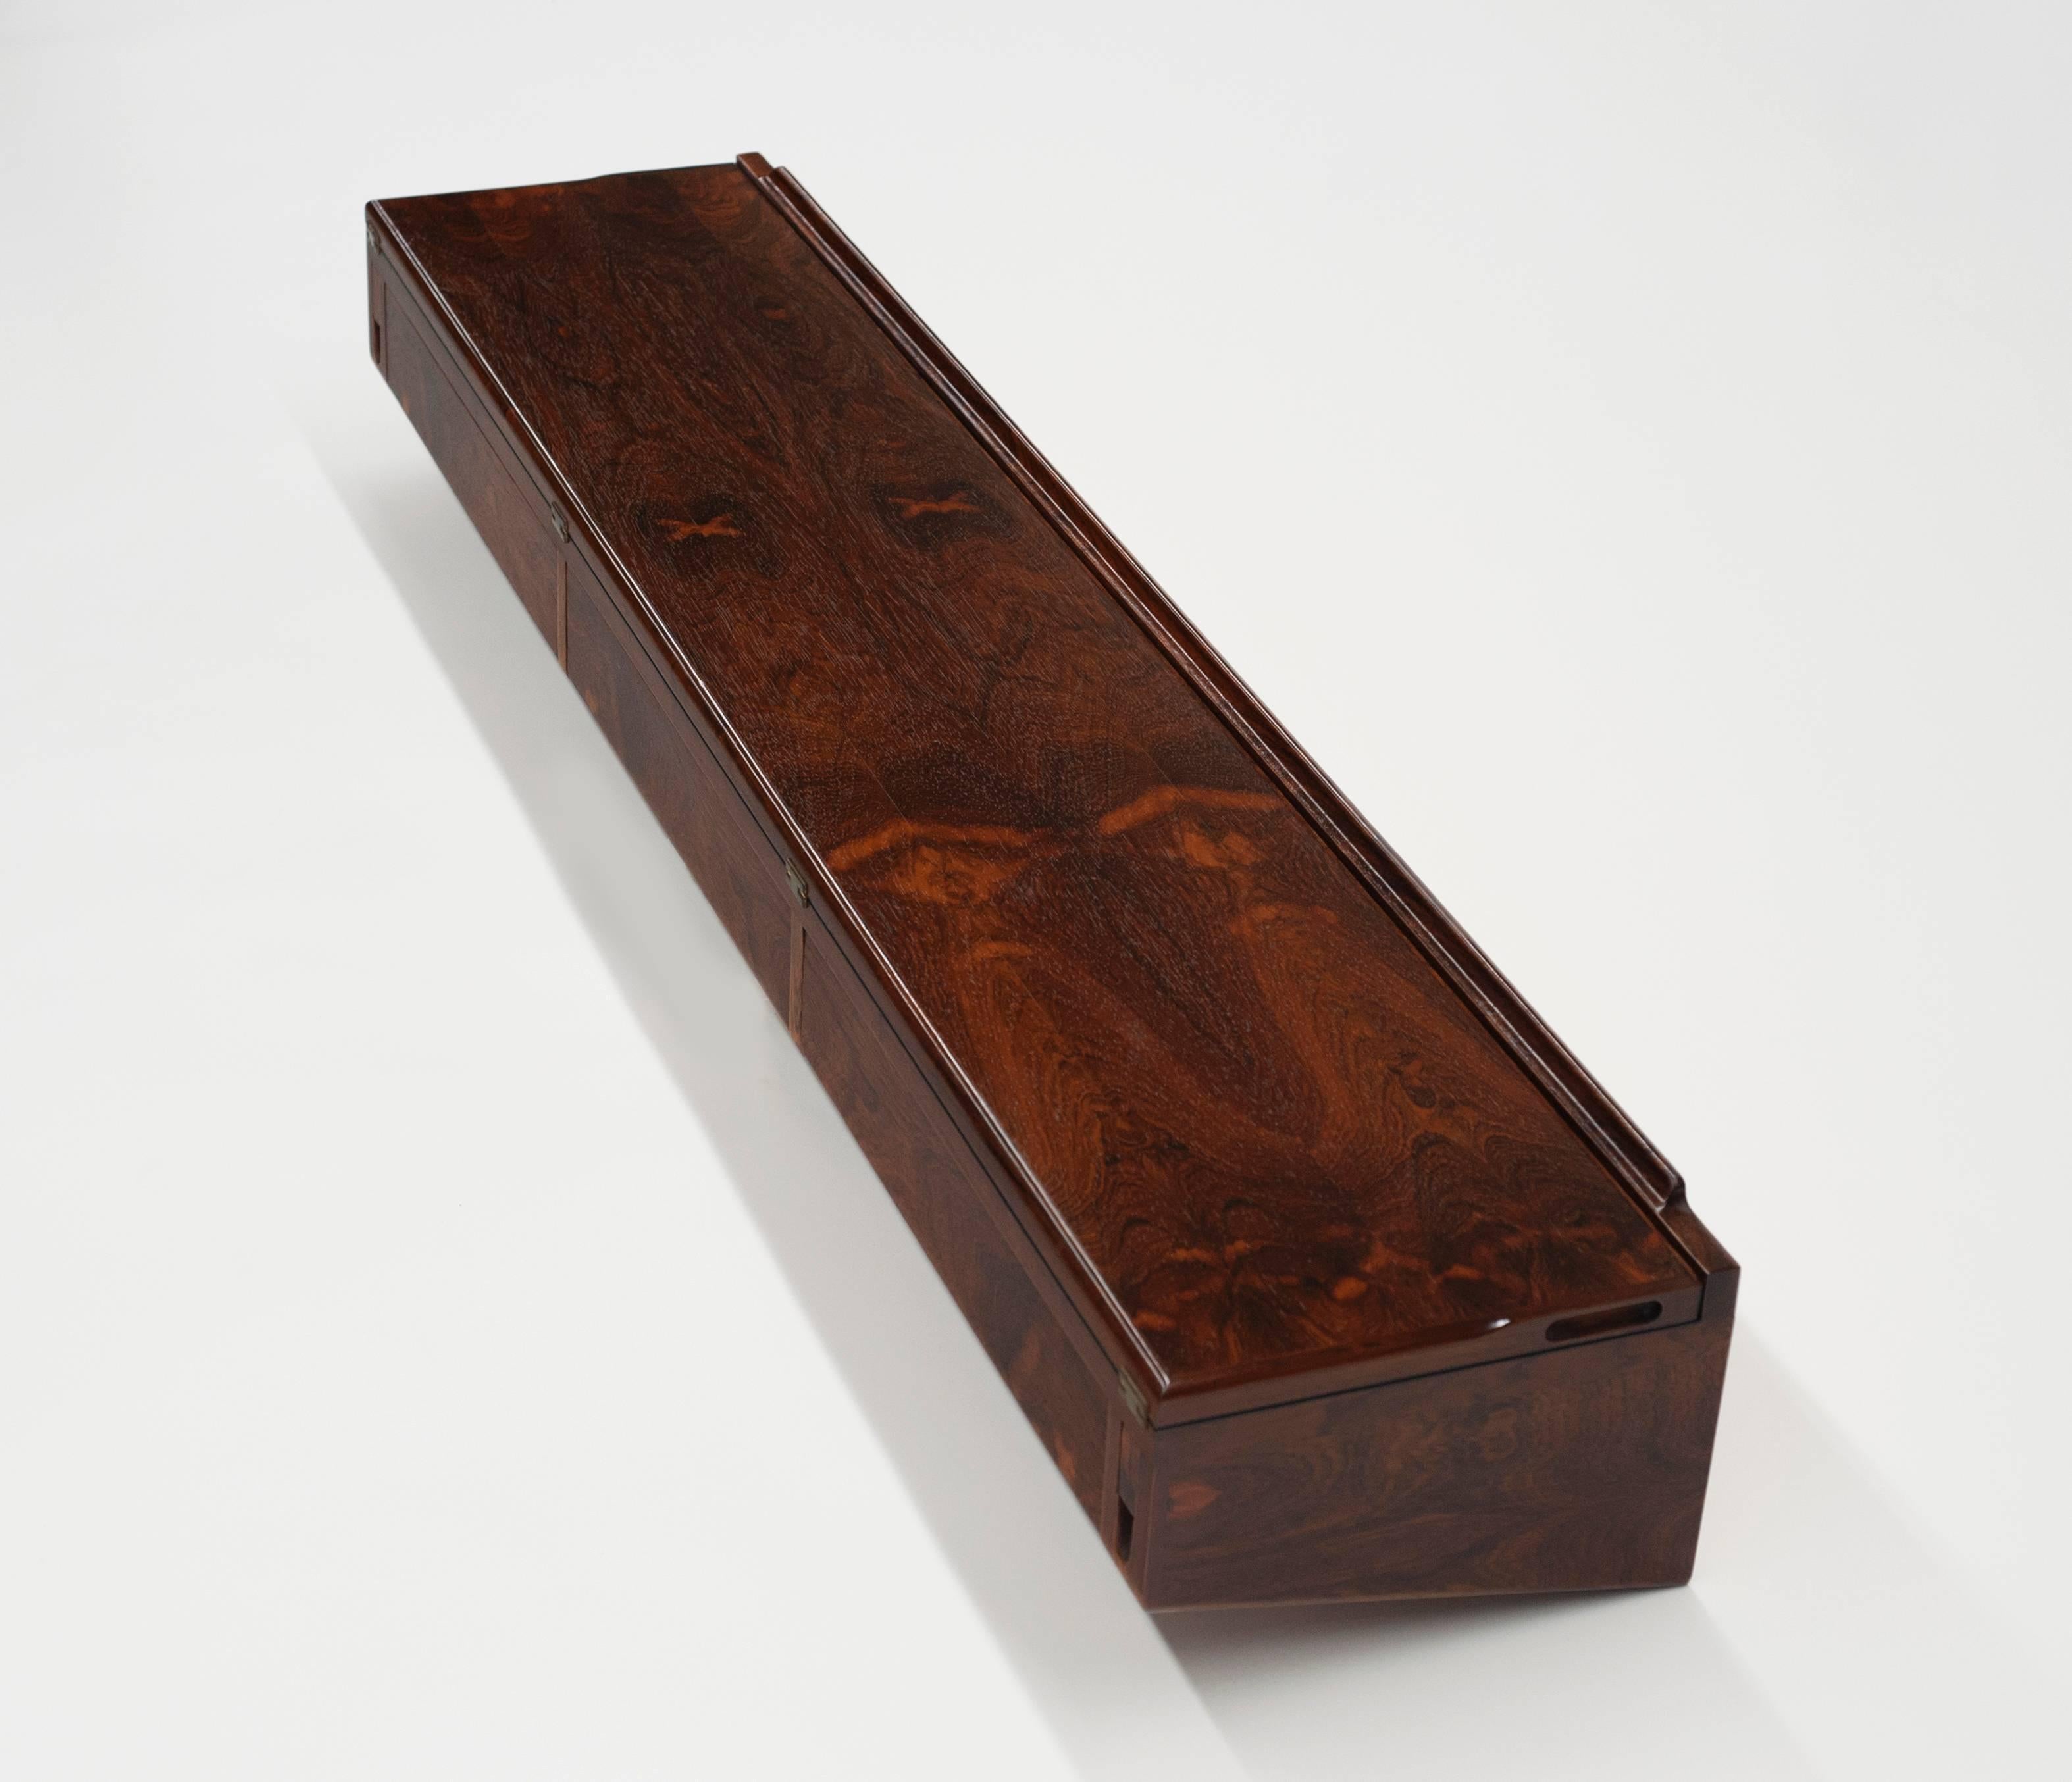 Exceptional rosewood wall-mounted console by Arne Hovmand-Olsen. Quality built in beautiful Brazilian rosewood. Console top flips open to reveal a black laminate that doubles the work space. Perfect for use as a bar or serving space. This is the